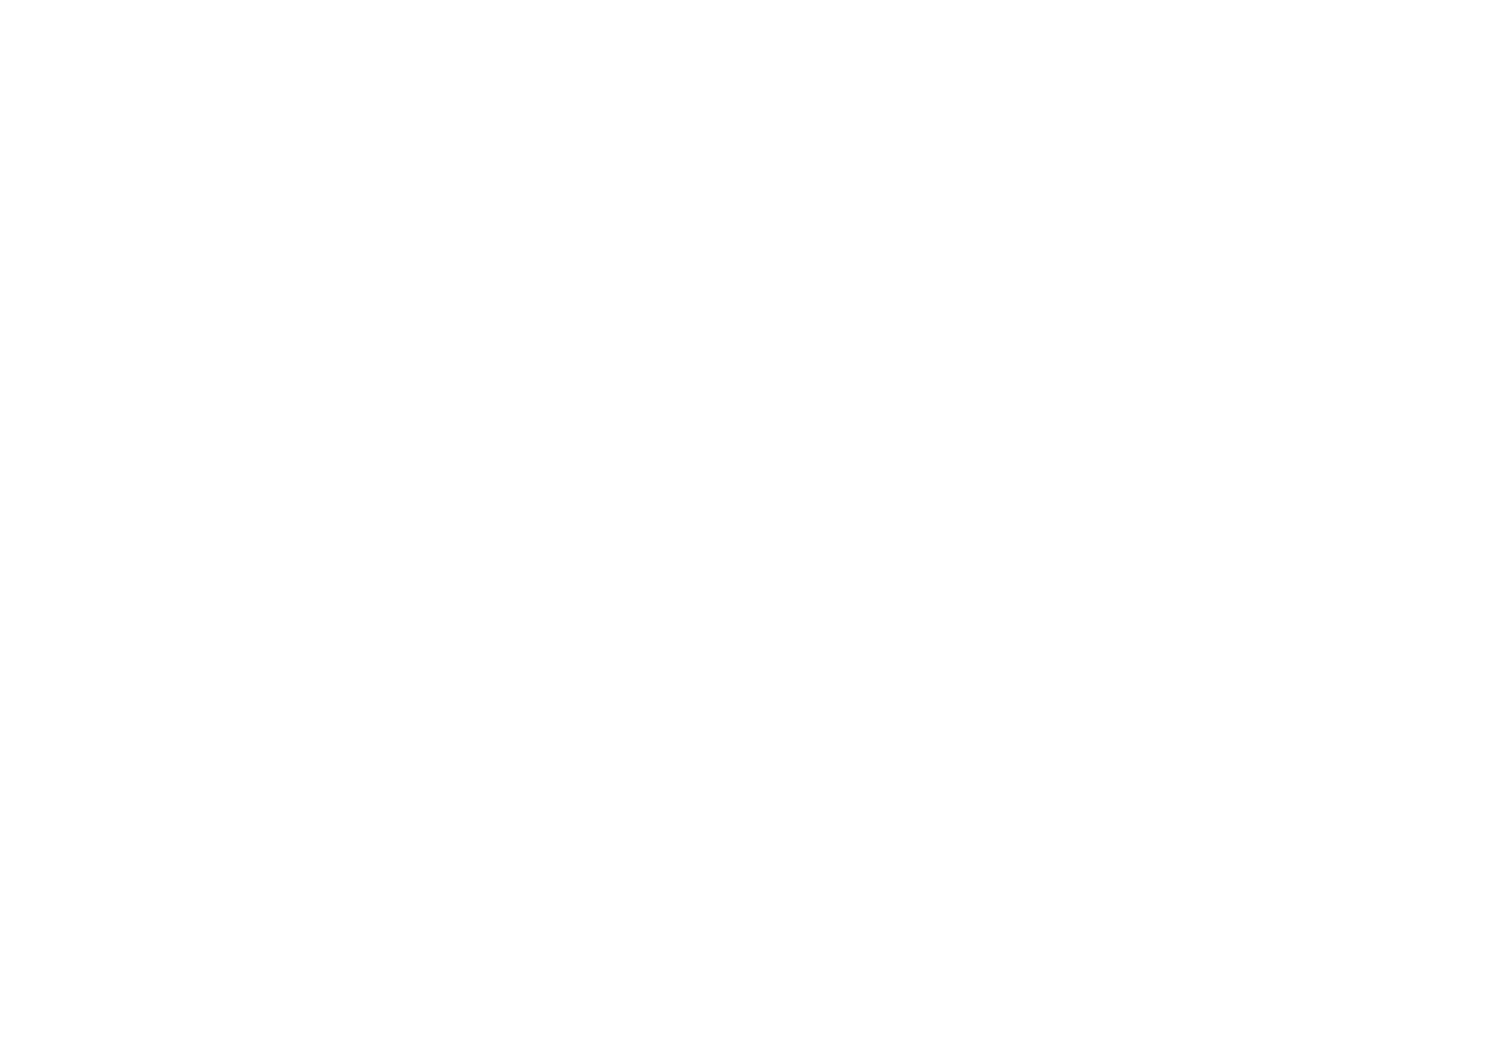  The 1937 Foundation